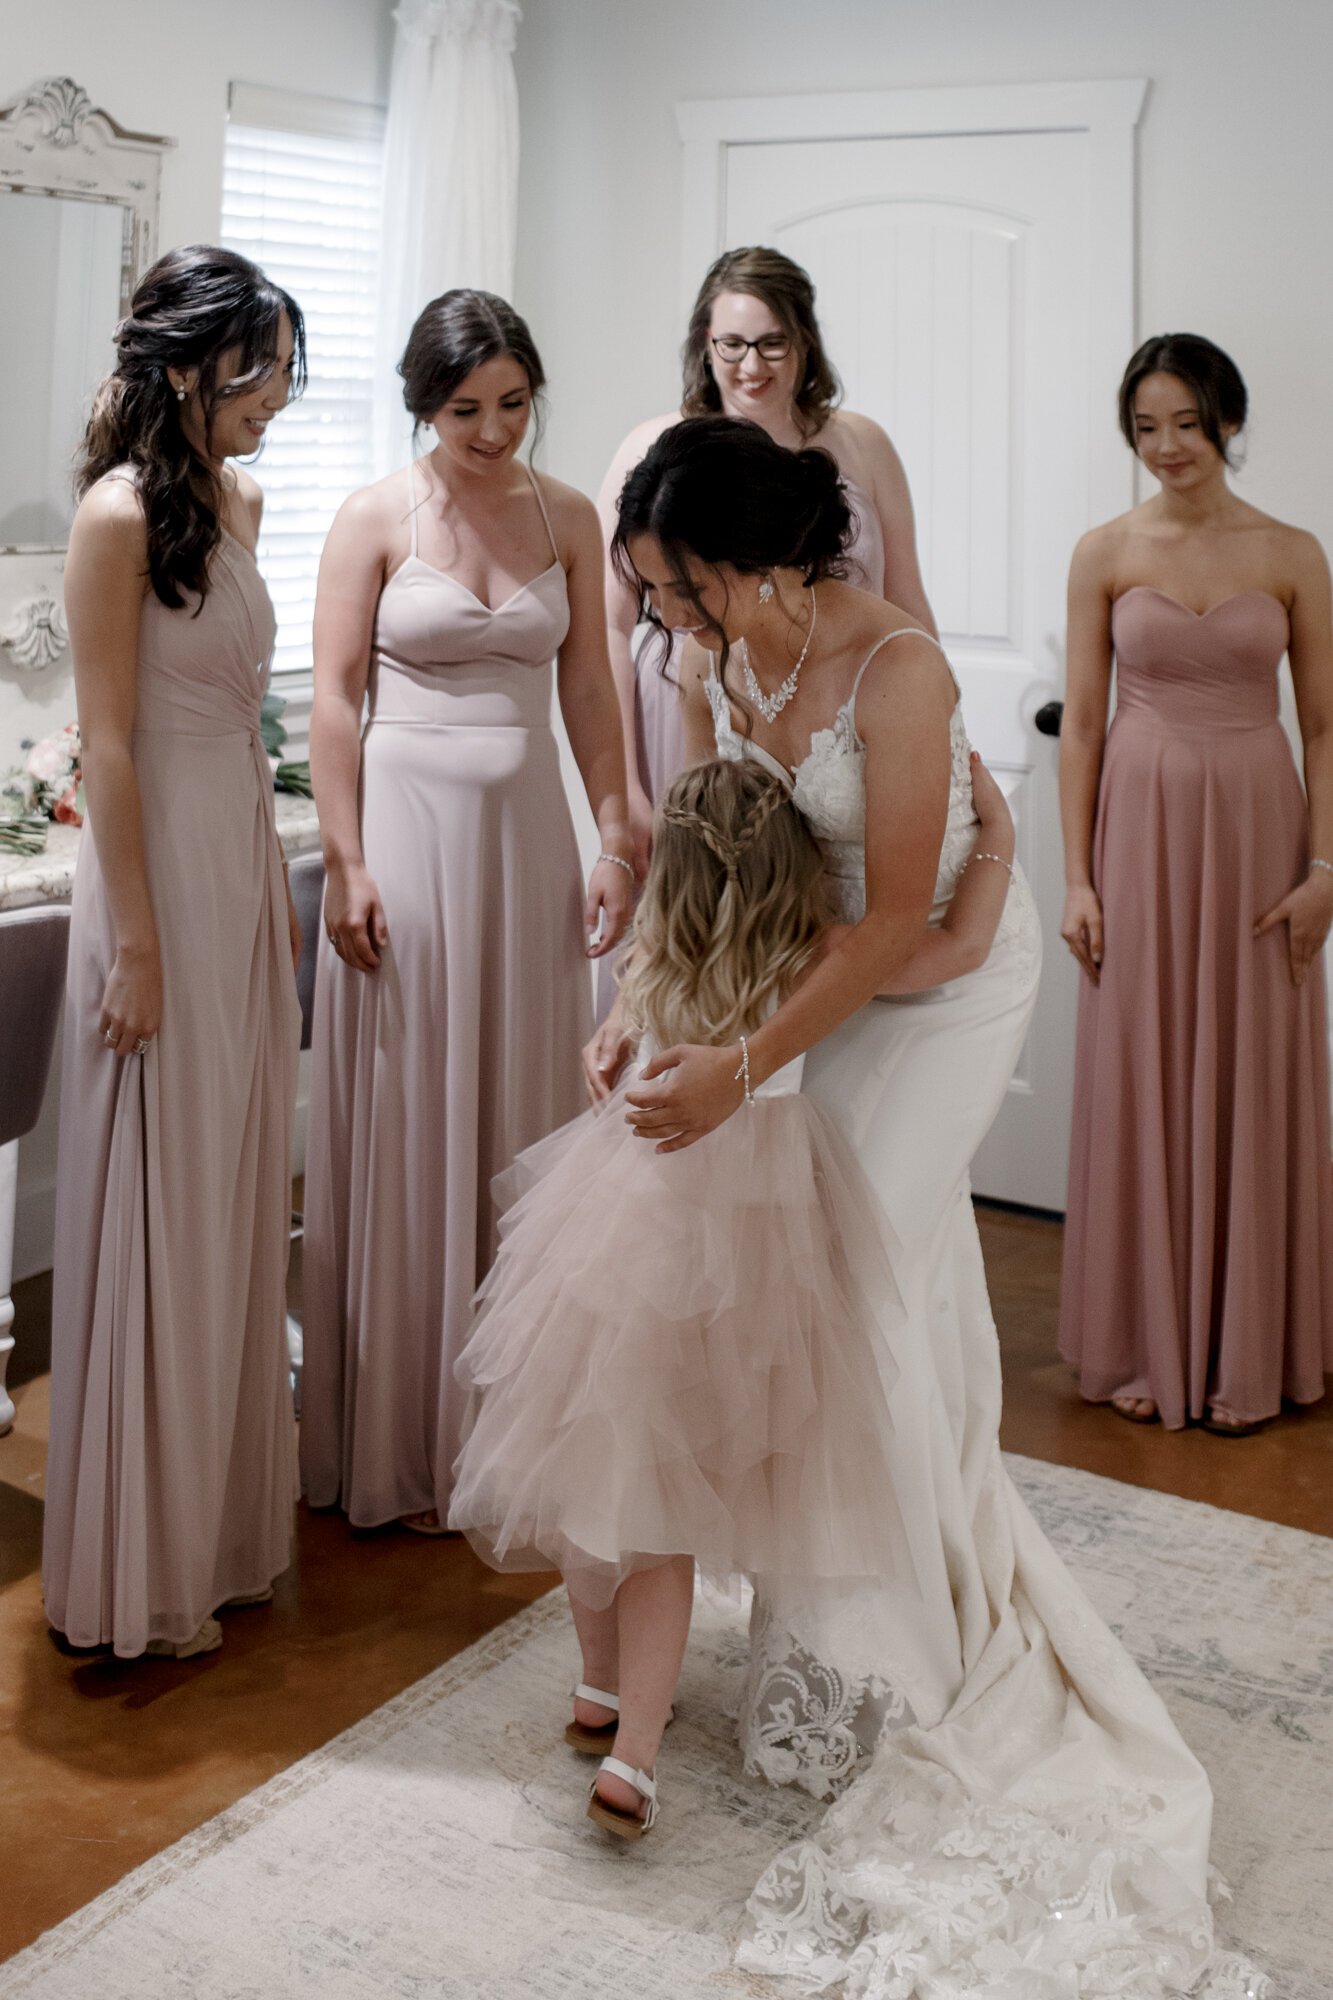 Bride getting ready hugging flower girl. Romantic Chic Country Wedding at Rustic Luxury Balmorhea Events&nbsp;Venue in Magnolia, TX